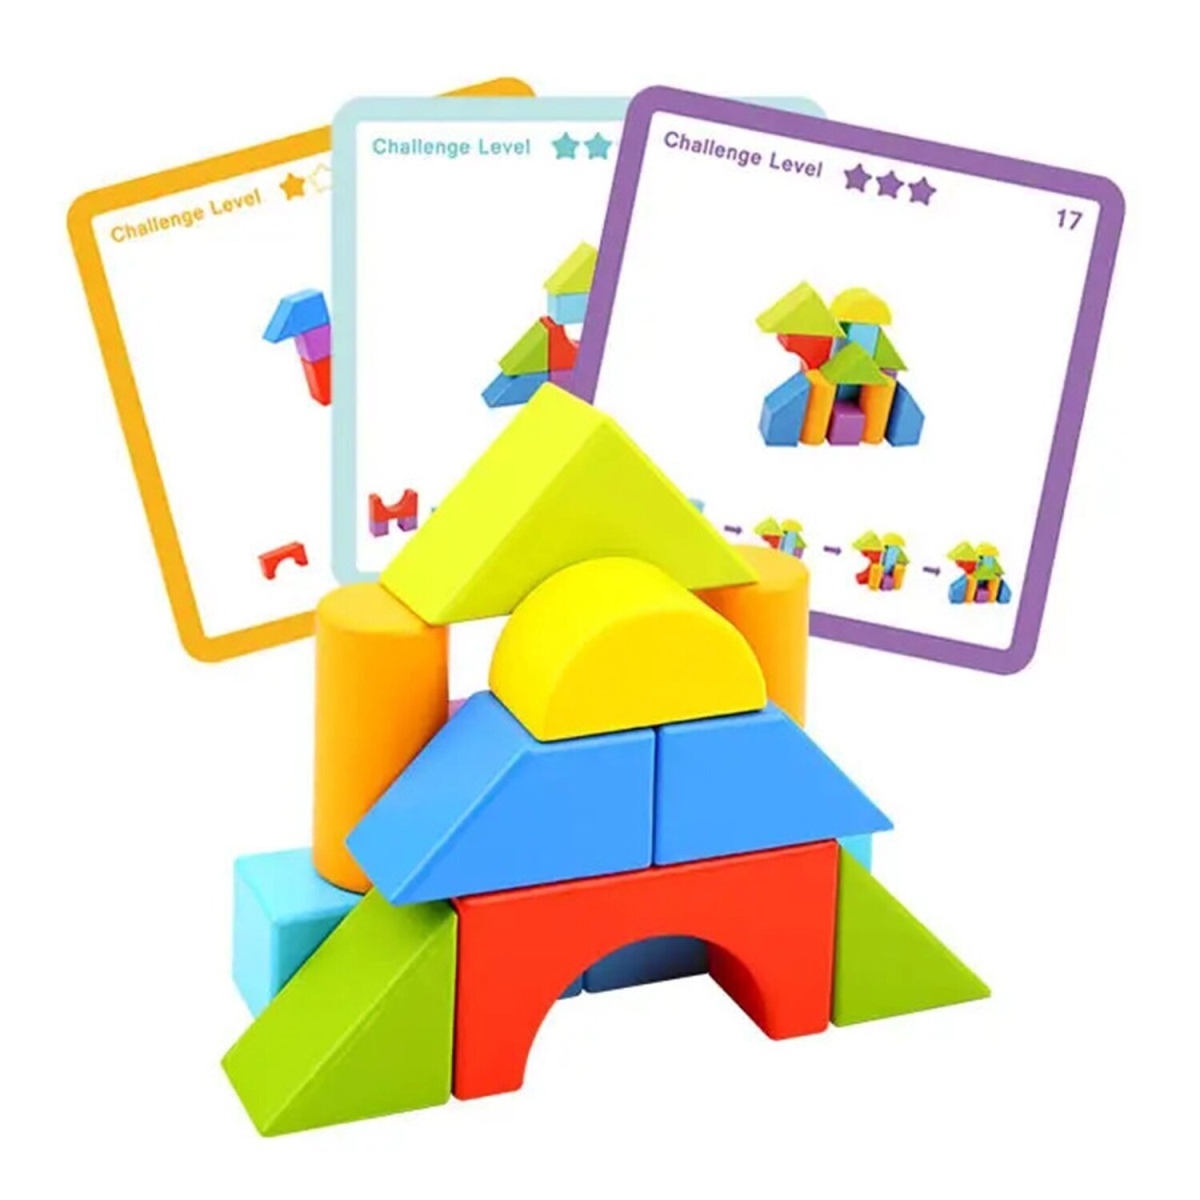 Picture of Tooky Toy 300288 22 x 22 x 6 cm Block Game